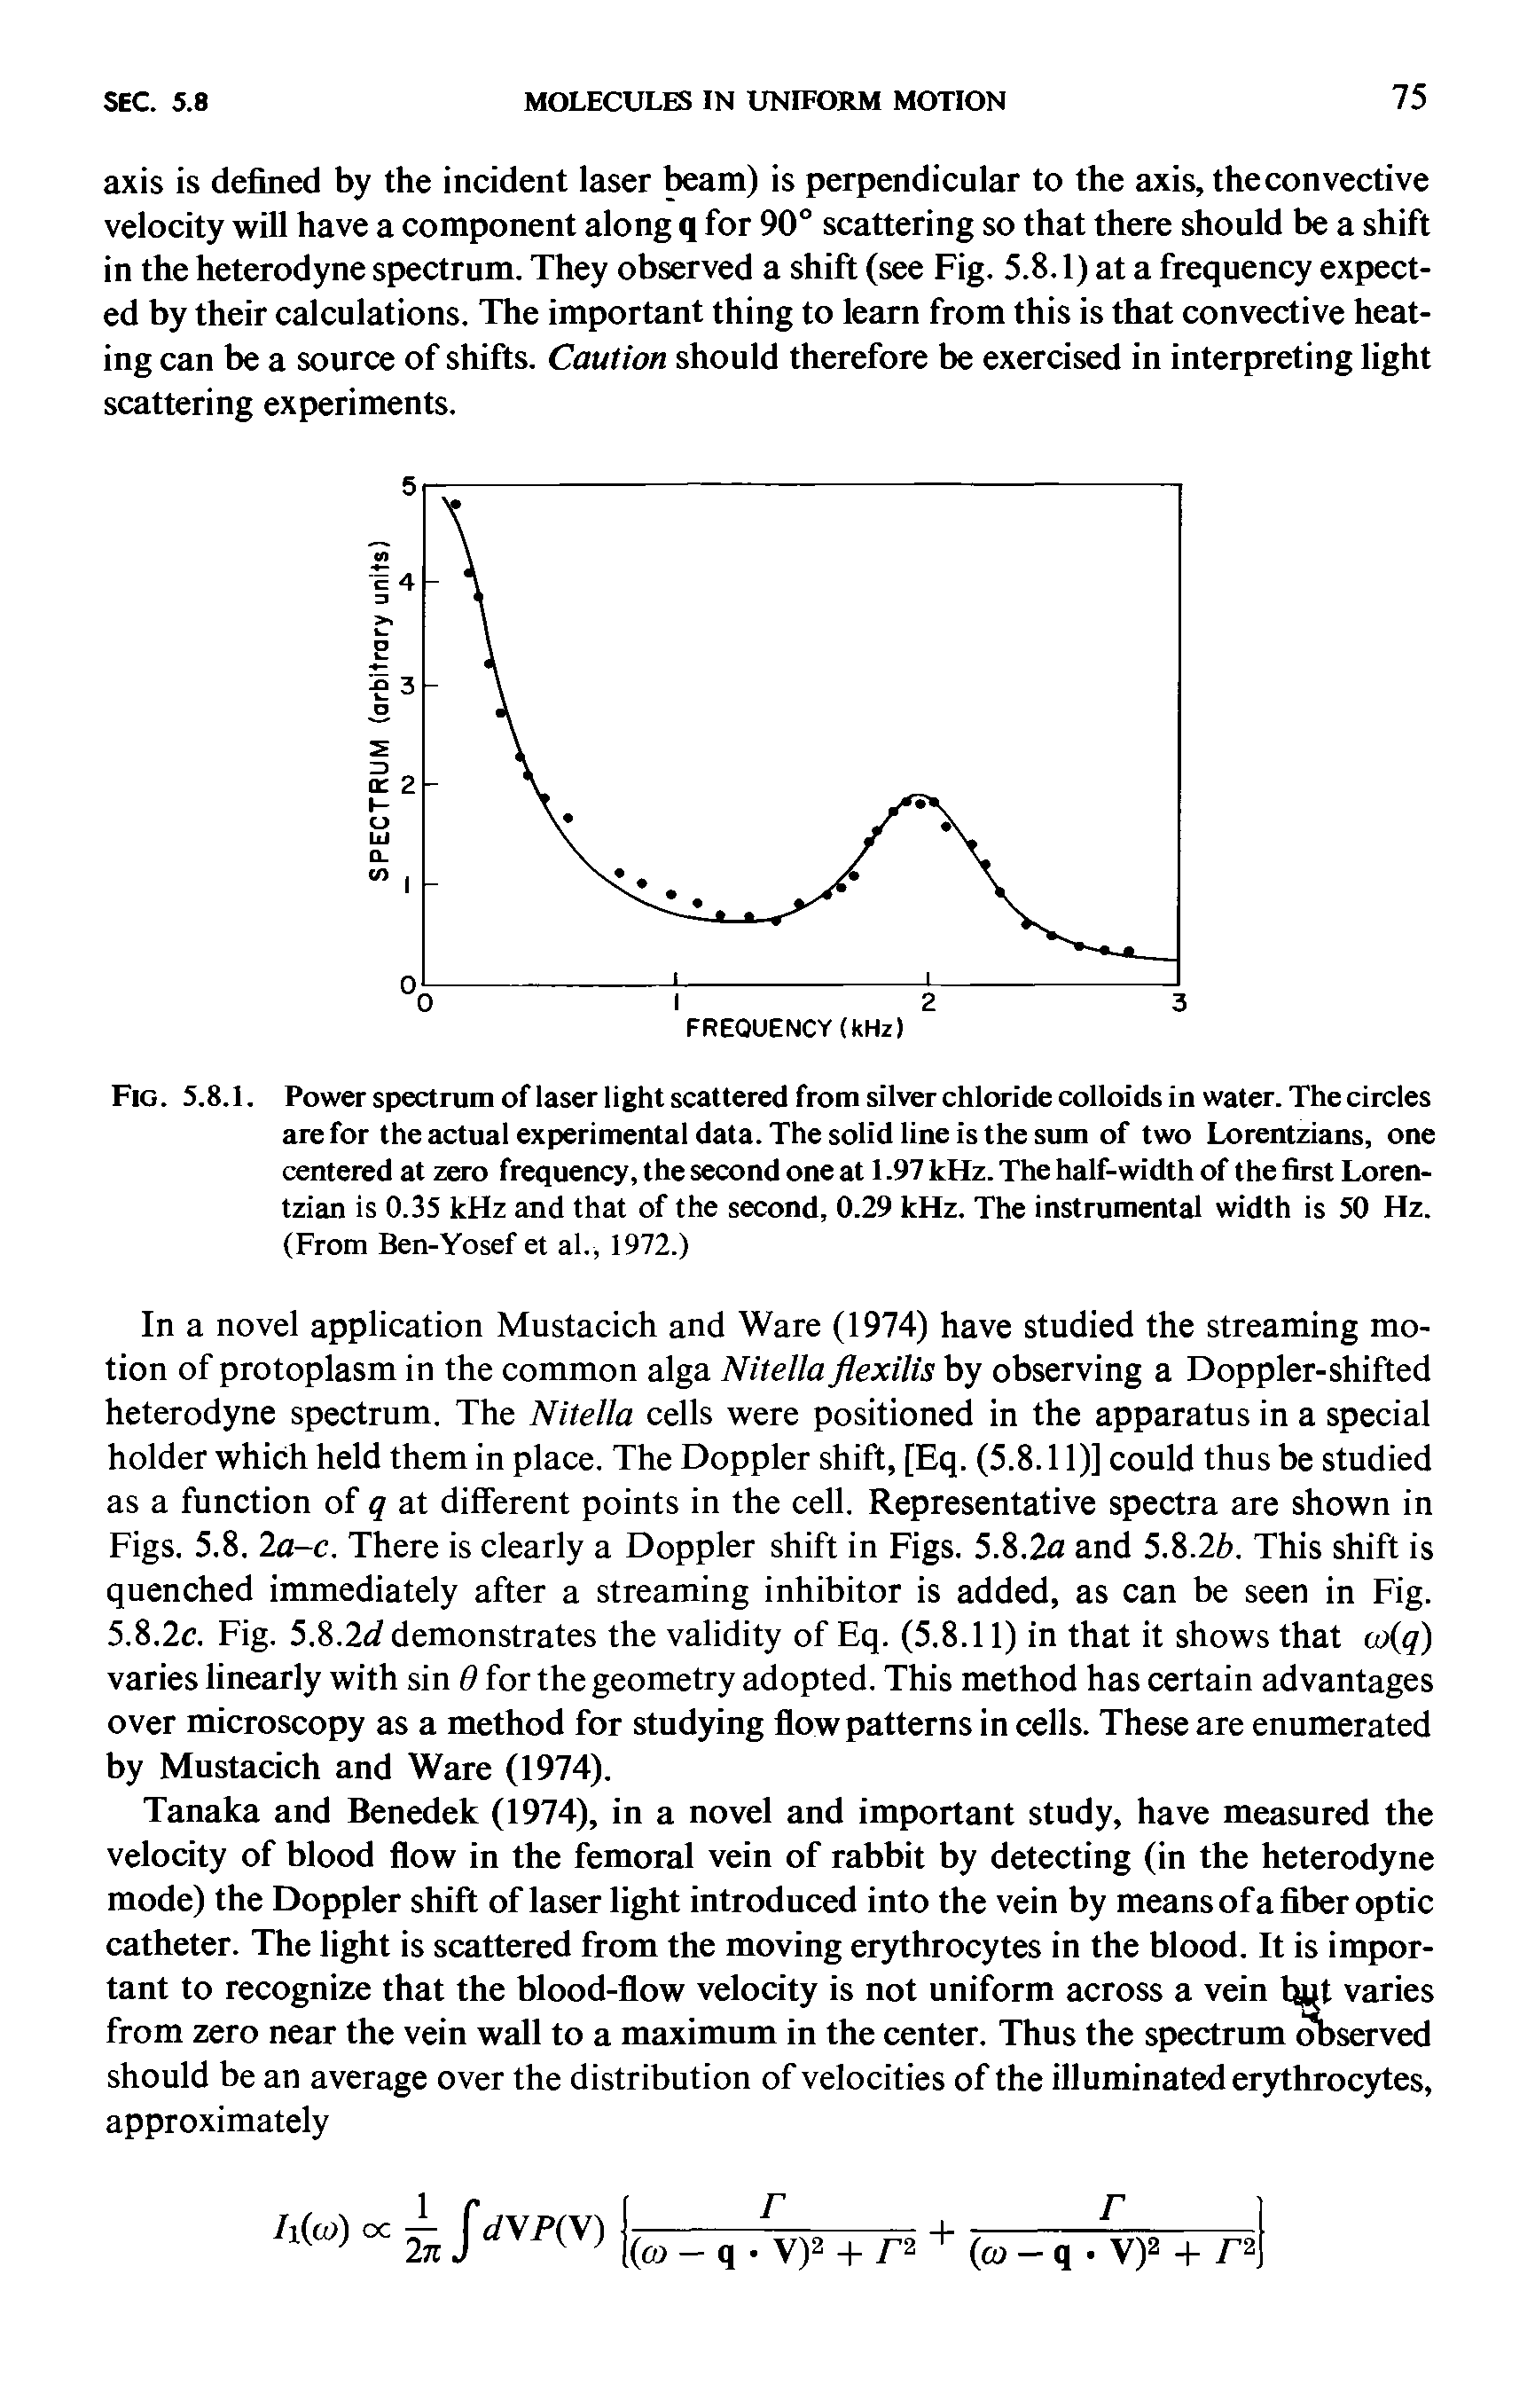 Fig. 5.8.1. Power spectrum of laser light scattered from silver chloride colloids in water. The circles are for the actual experimental data. The solid line is the sum of two Lorentzians, one centered at zero frequency, the second one at 1.97 kHz. The half-width of the first Loren-tzian is 0.35 kHz and that of the second, 0.29 kHz. The instrumental width is 50 Hz. (From Ben-Yosef et al., 1972.)...